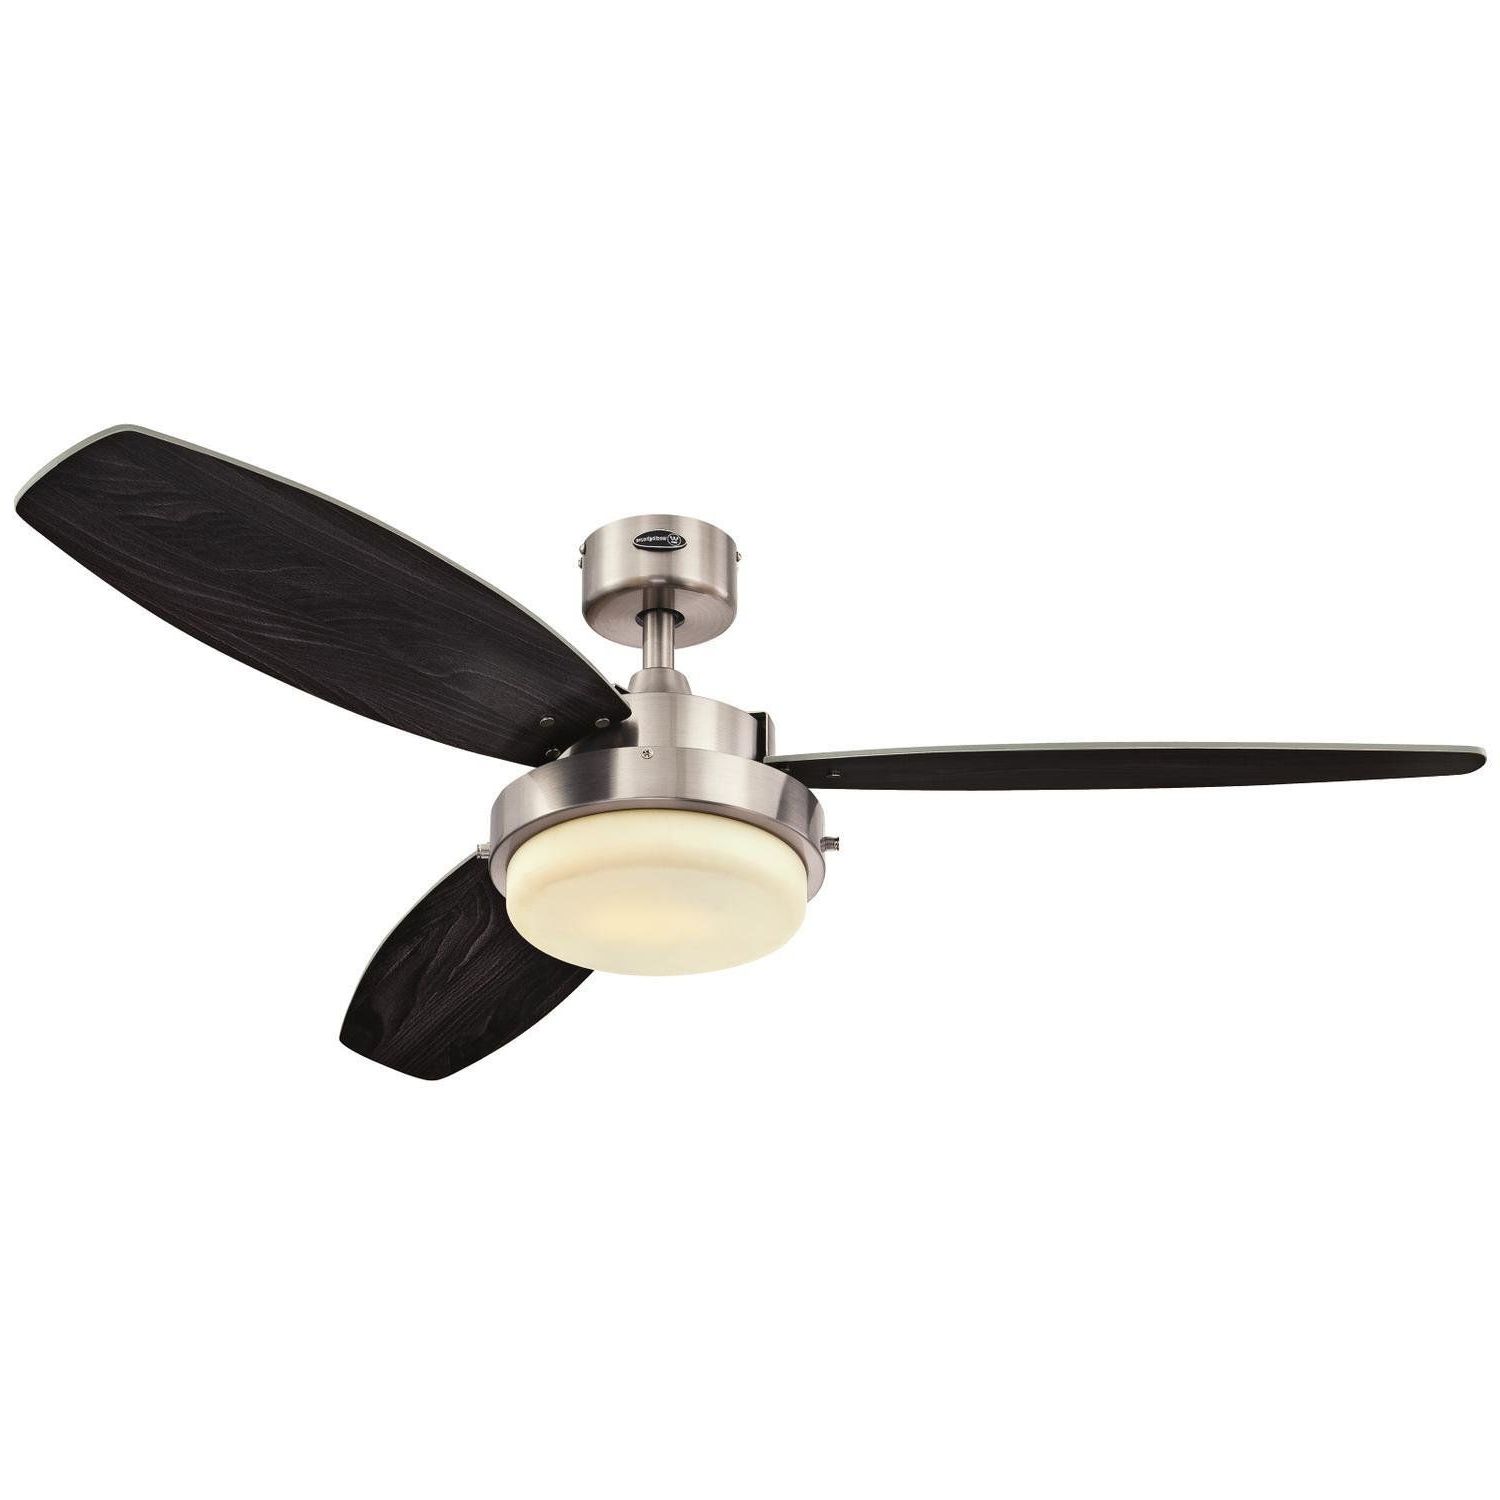 52" Corsa Two Light Reversible Plywood 3 Blade Ceiling Fan In Most Up To Date Corsa 3 Blade Ceiling Fans (View 9 of 20)